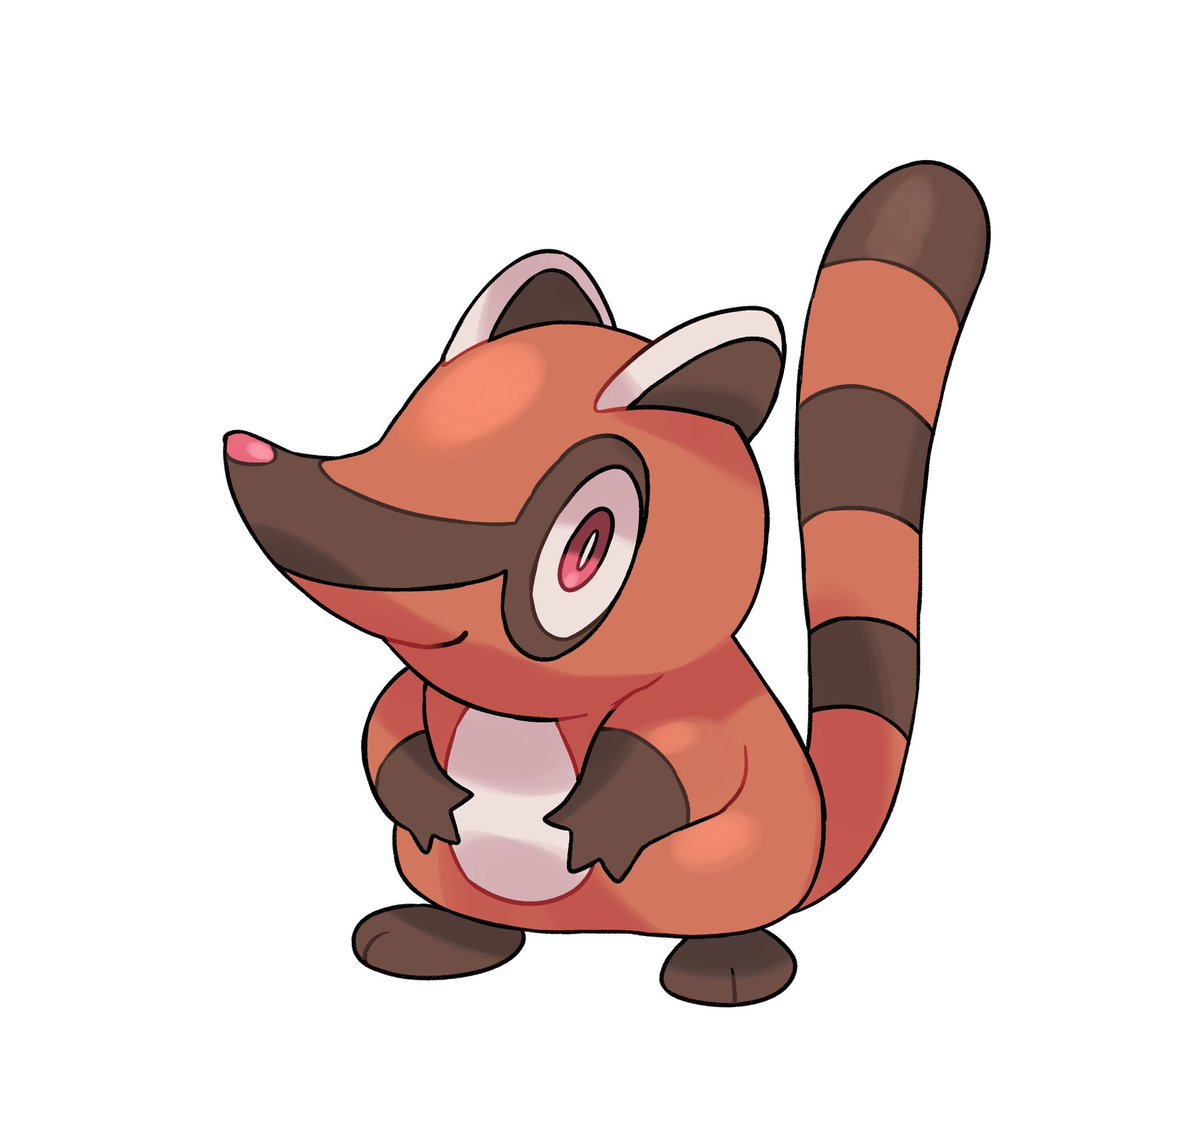 Idk why i like Cuatot so much, theres nothing rlly special about him hes literally the route 1 normal type, but its still one of my favorite designs 